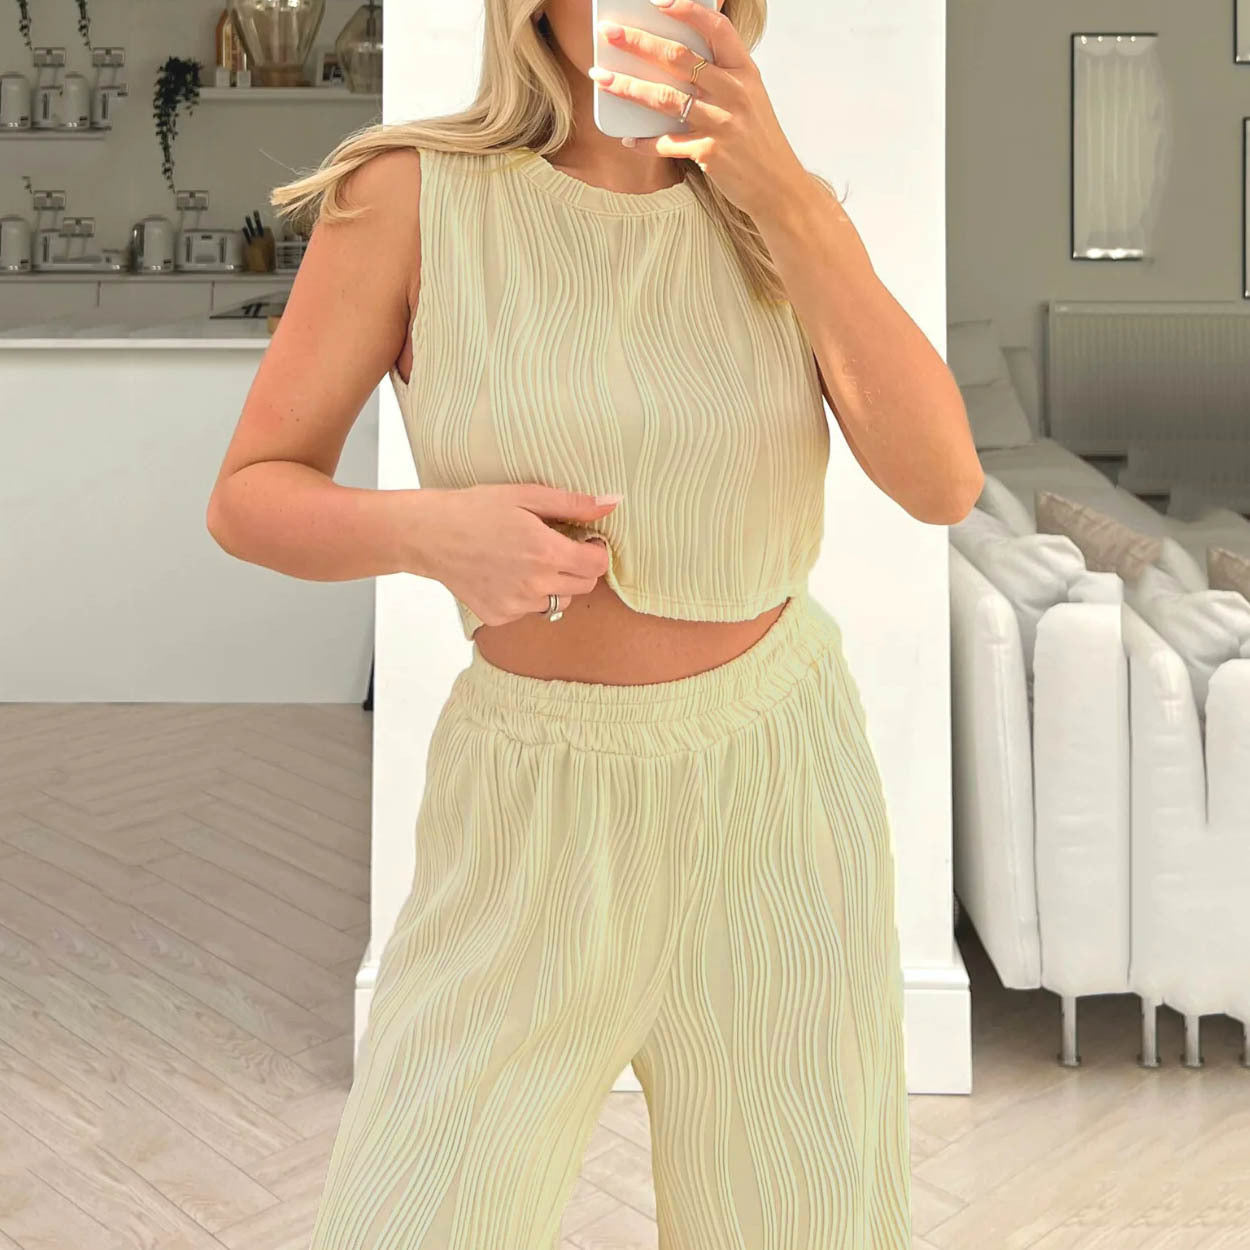 Summer Solid Color Sleeveless Vest Top Trousers Women Wear Two Piece Casual Suit for Women